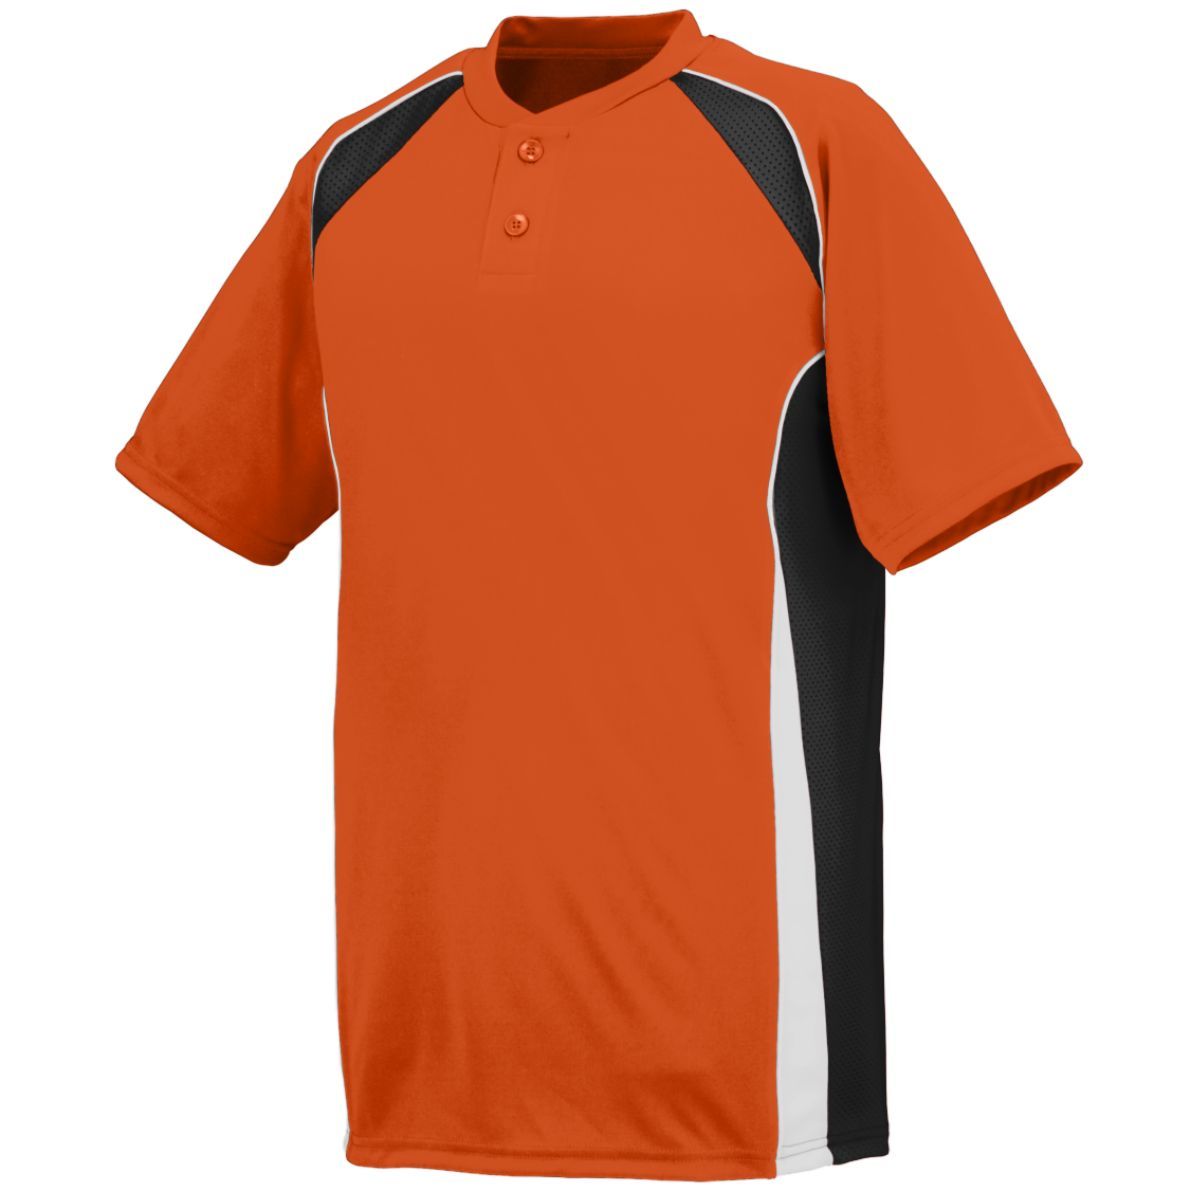 Augusta Sportswear Youth Base Hit Jersey in Orange/Black/White  -Part of the Youth, Youth-Jersey, Augusta-Products, Baseball, Shirts, All-Sports, All-Sports-1 product lines at KanaleyCreations.com